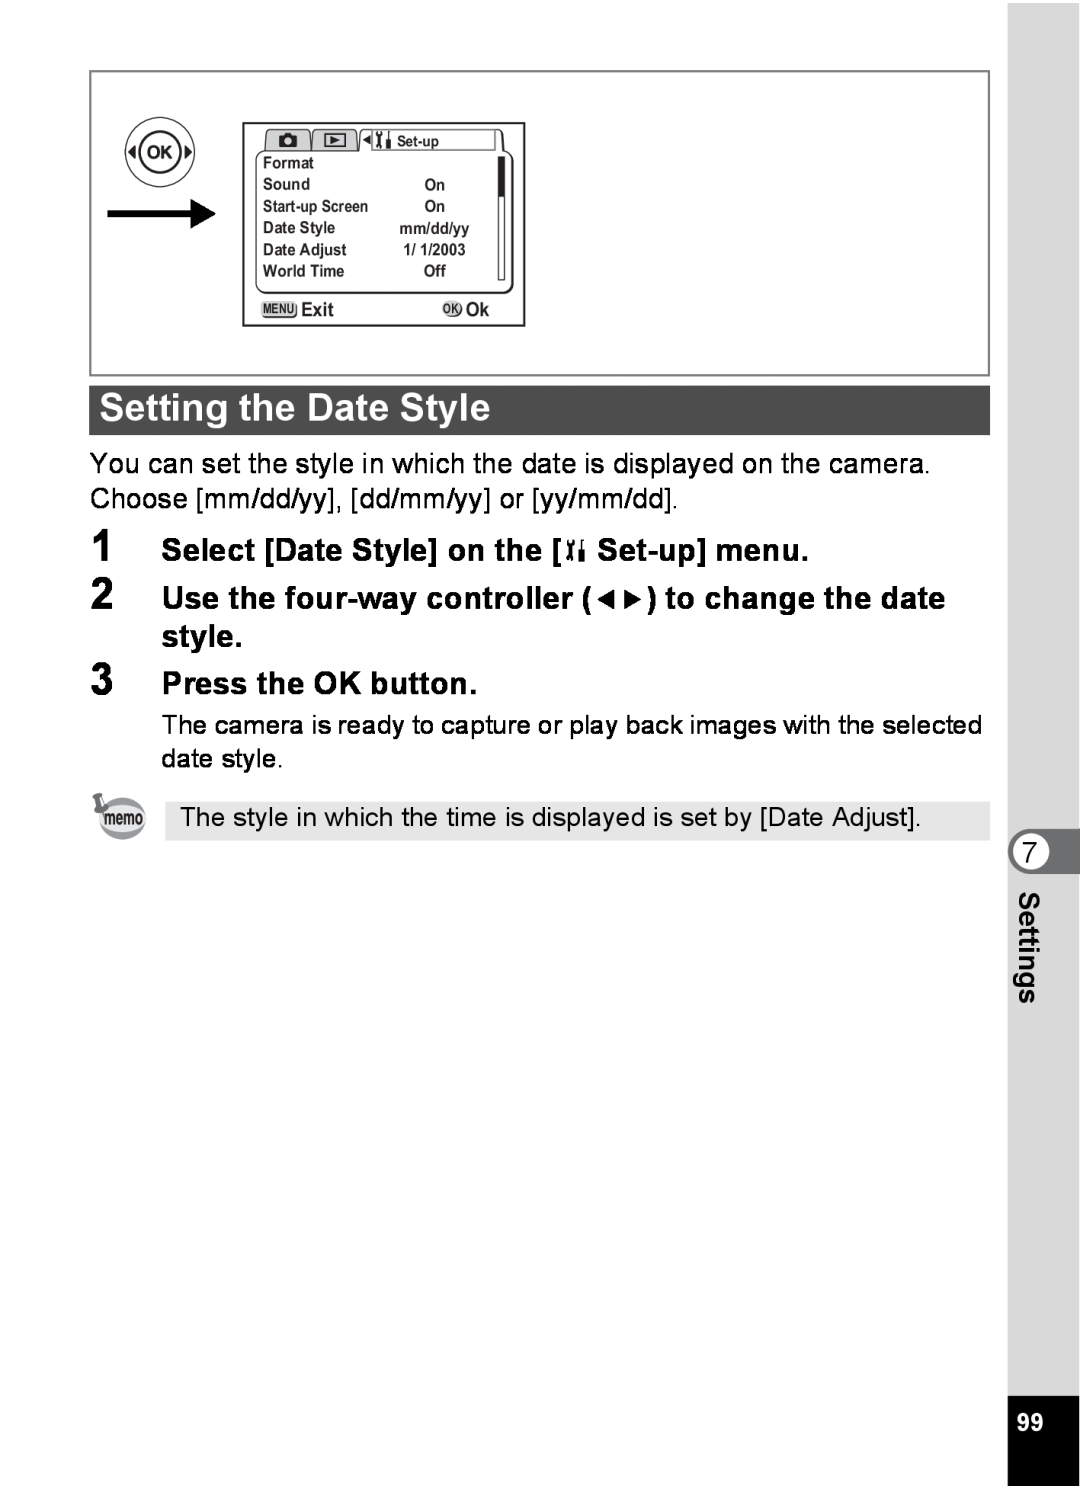 Pentax S4 manual Setting the Date Style, Select Date Style on the B Set-up menu, Press the OK button, Settings 